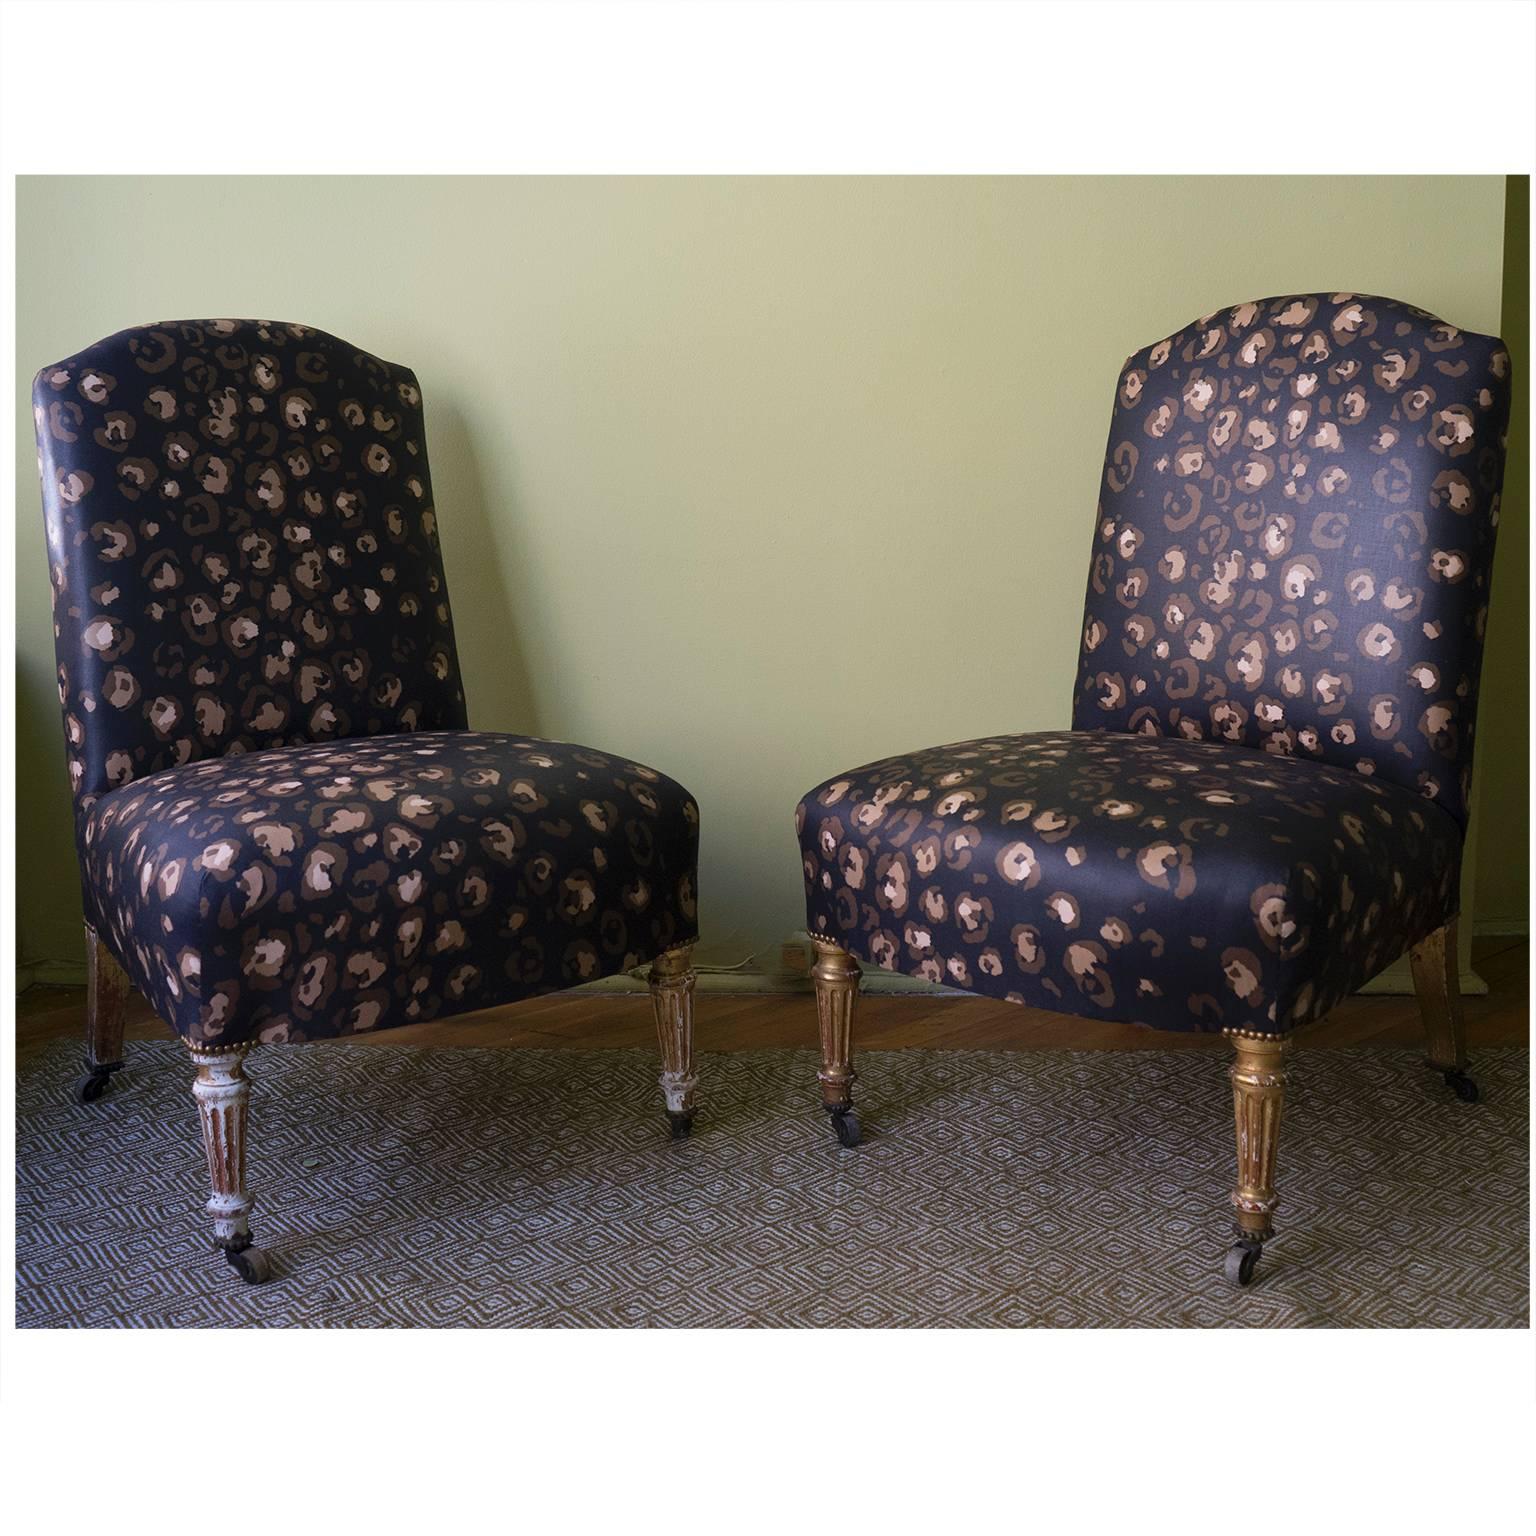 Pair of late 19th century French slipper chairs with gilded legs, circa 1890. Newly upholstered in Bob Collins glazed chintz.